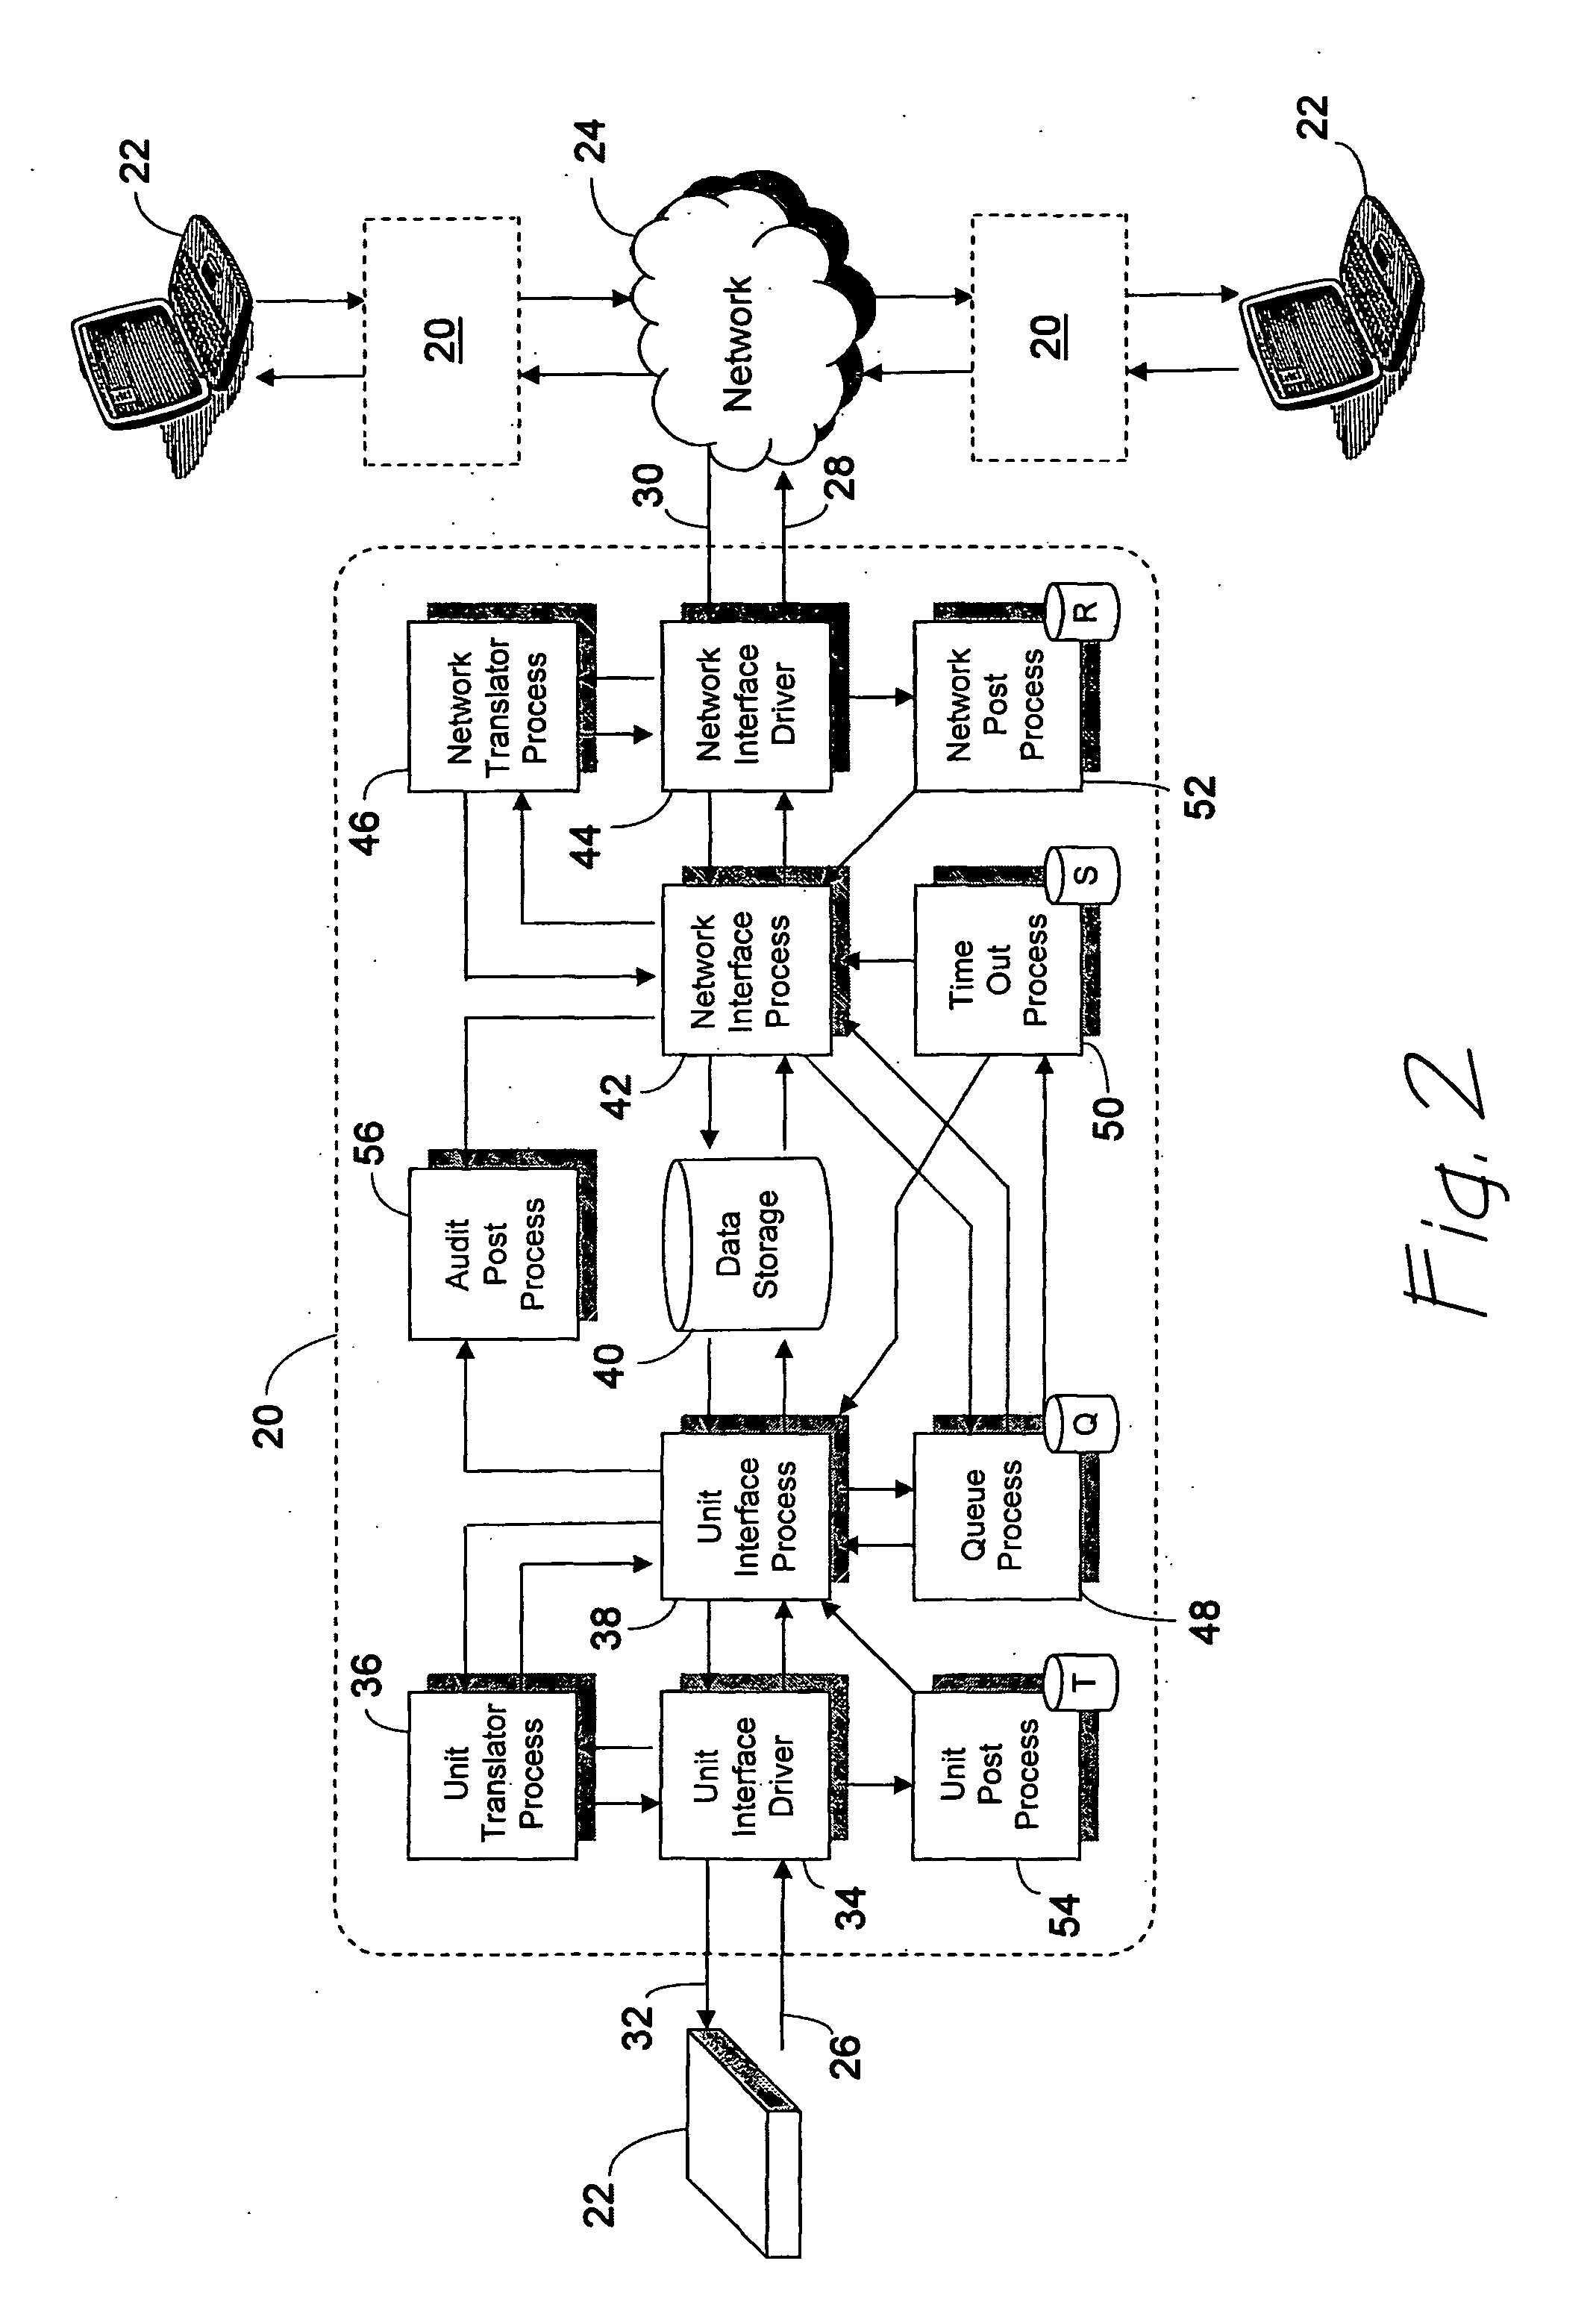 Method and system for securely managing application transactions using cryptographic techniques